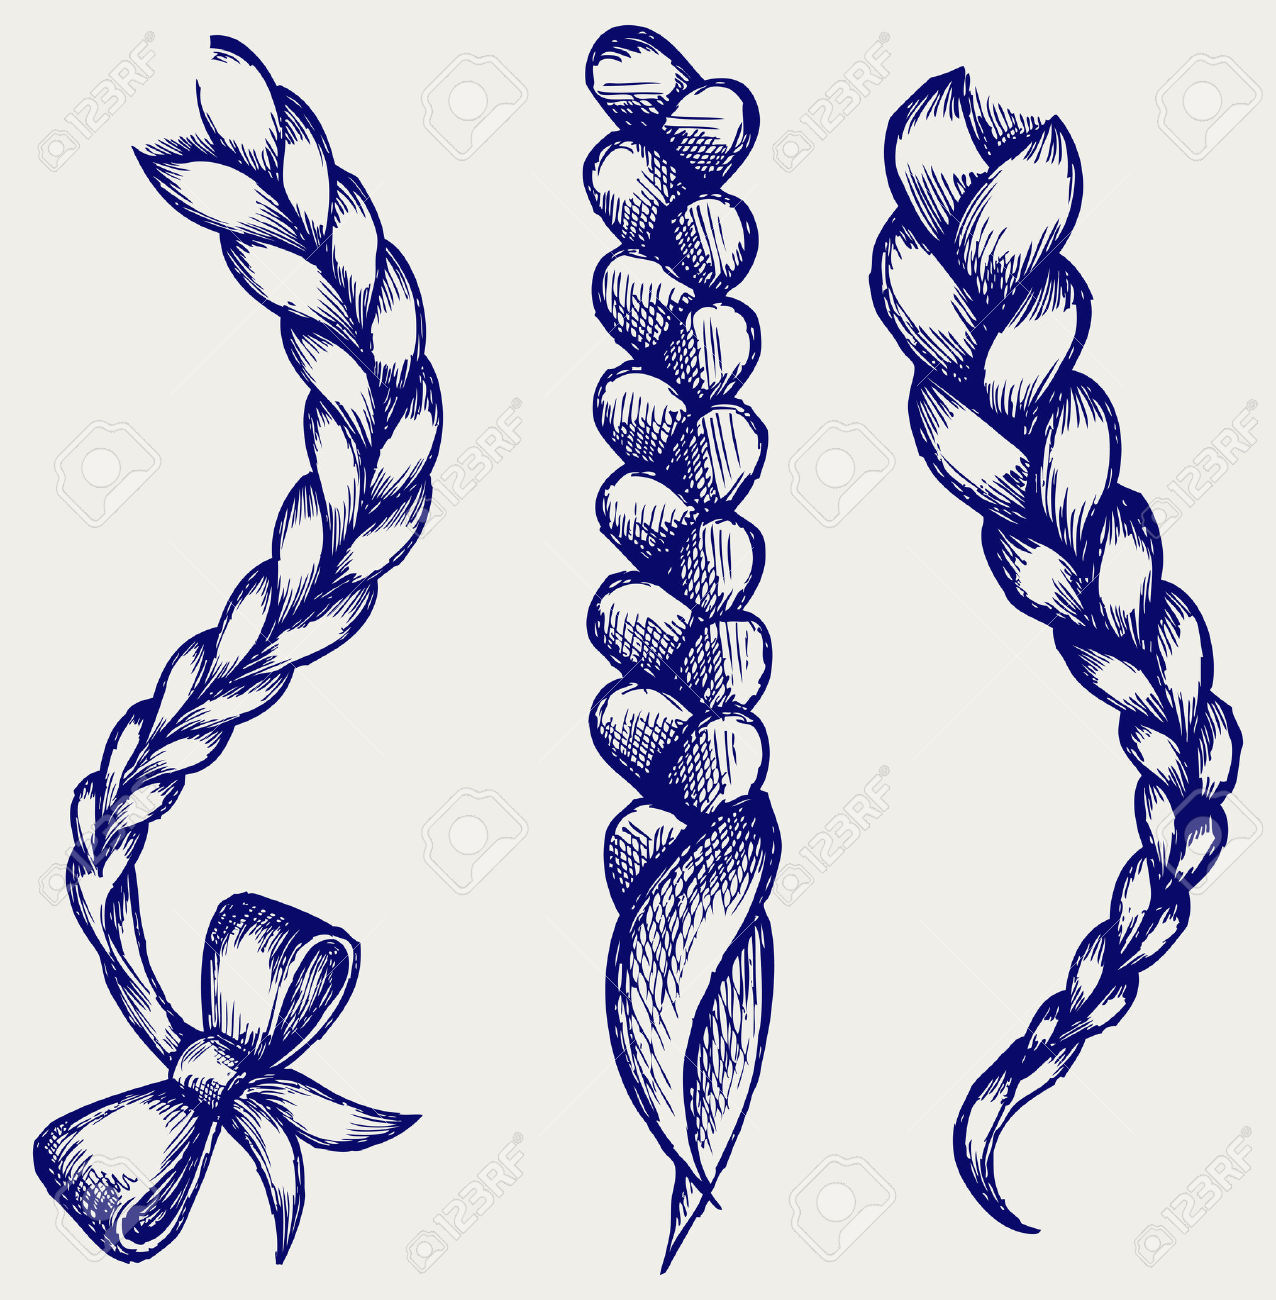 Braid clipart #4, Download drawings